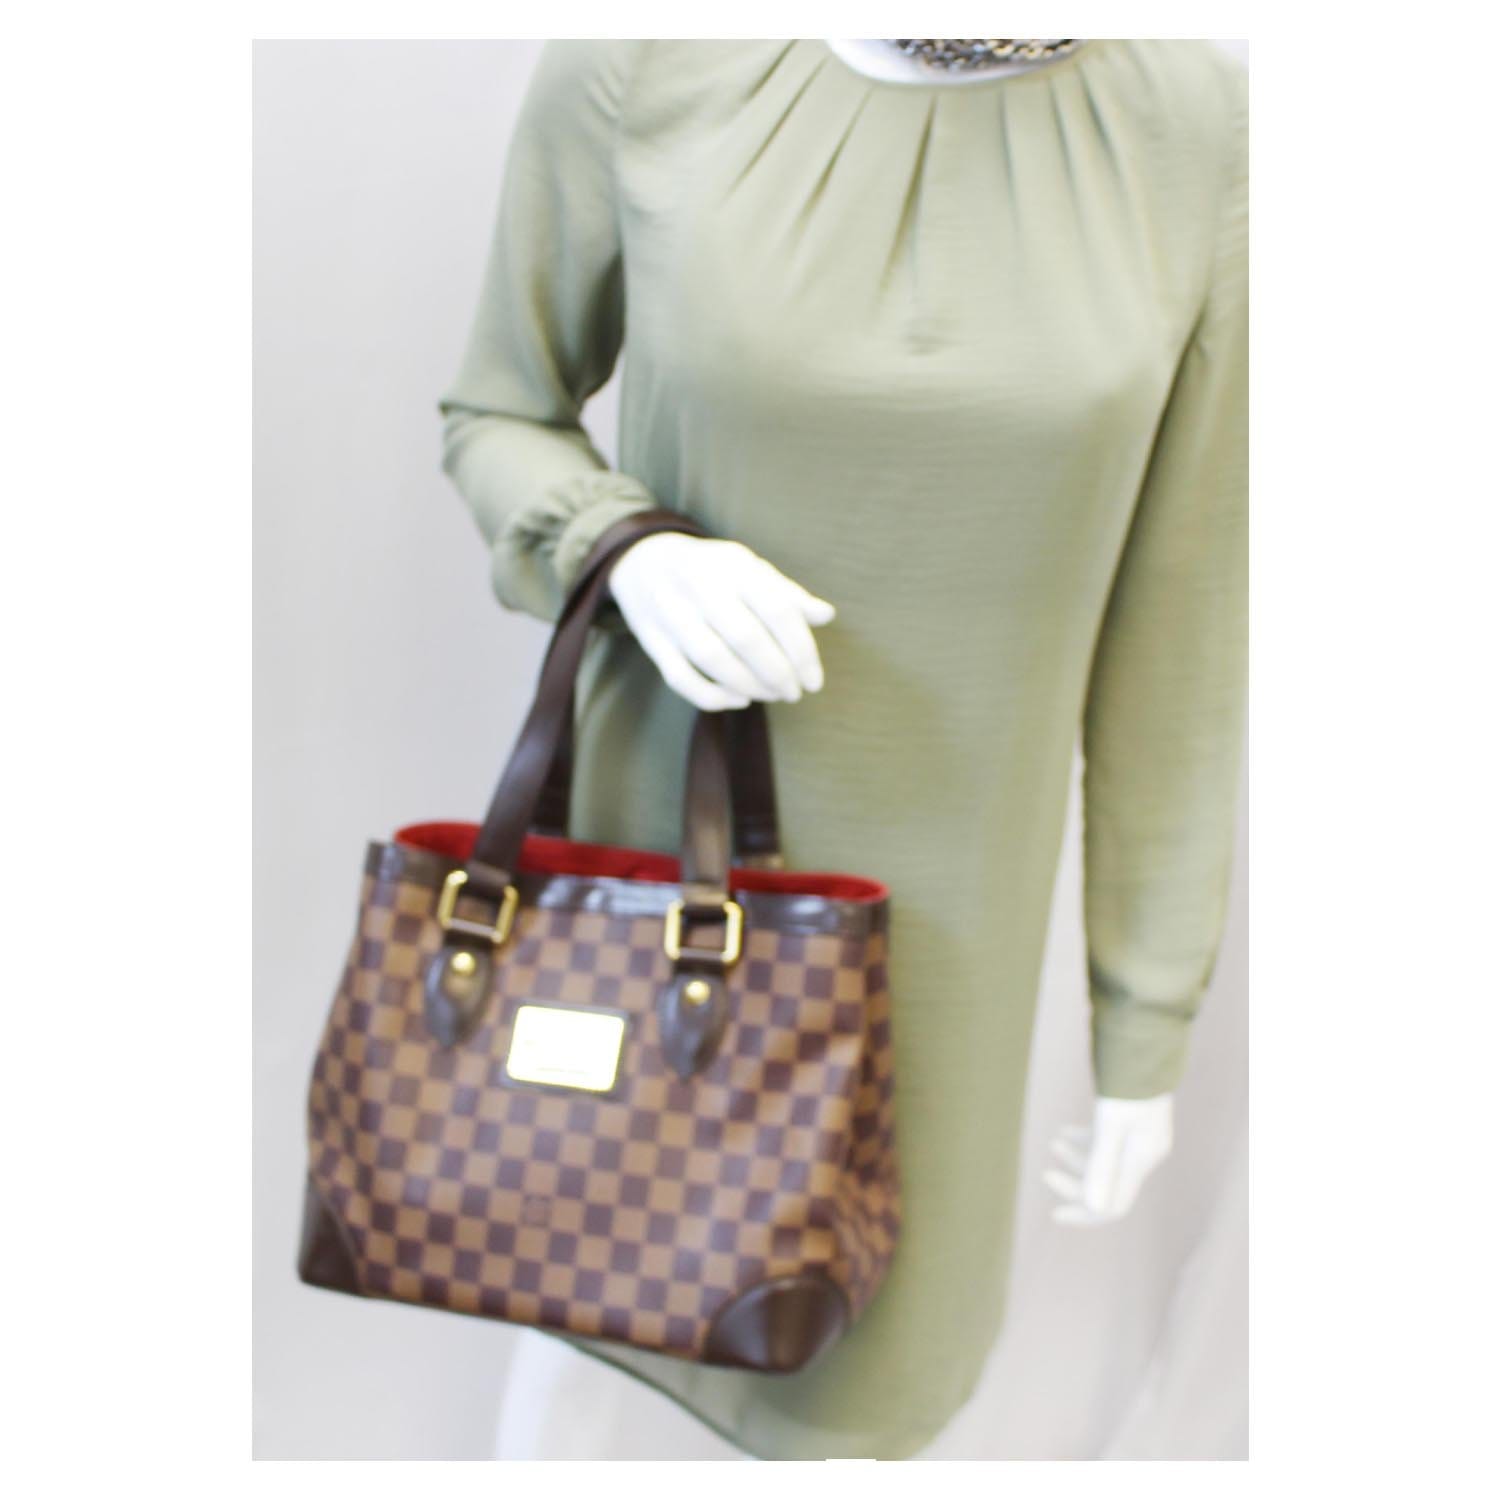 Hampstead leather handbag Louis Vuitton Brown in Leather - 32682961